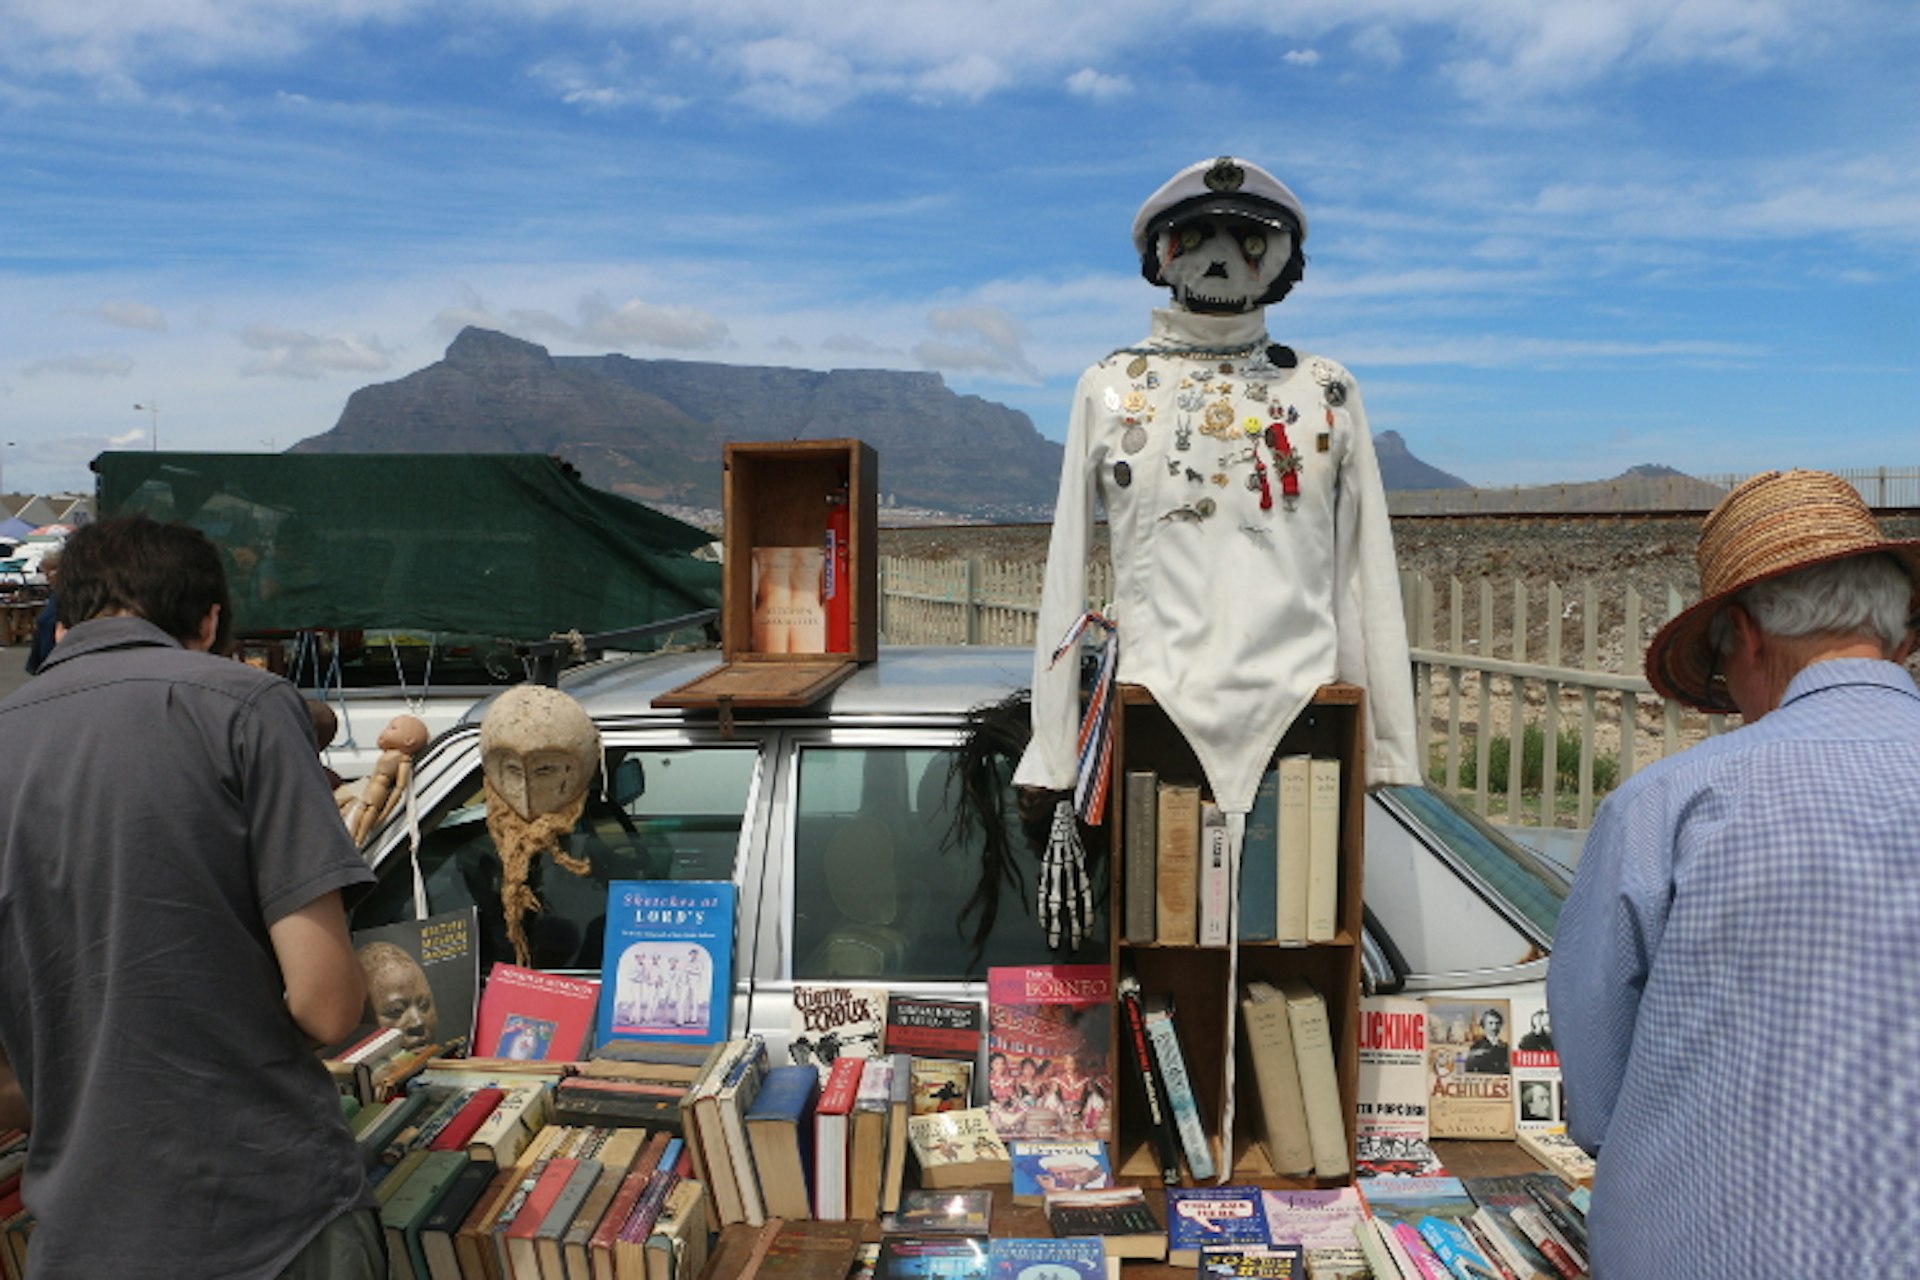 Shelves of books and a make-shift scare-crow wearing a skippers hat and white shirt covered in decorative pins stand in front of a car at the market; Table Mountain is the background.